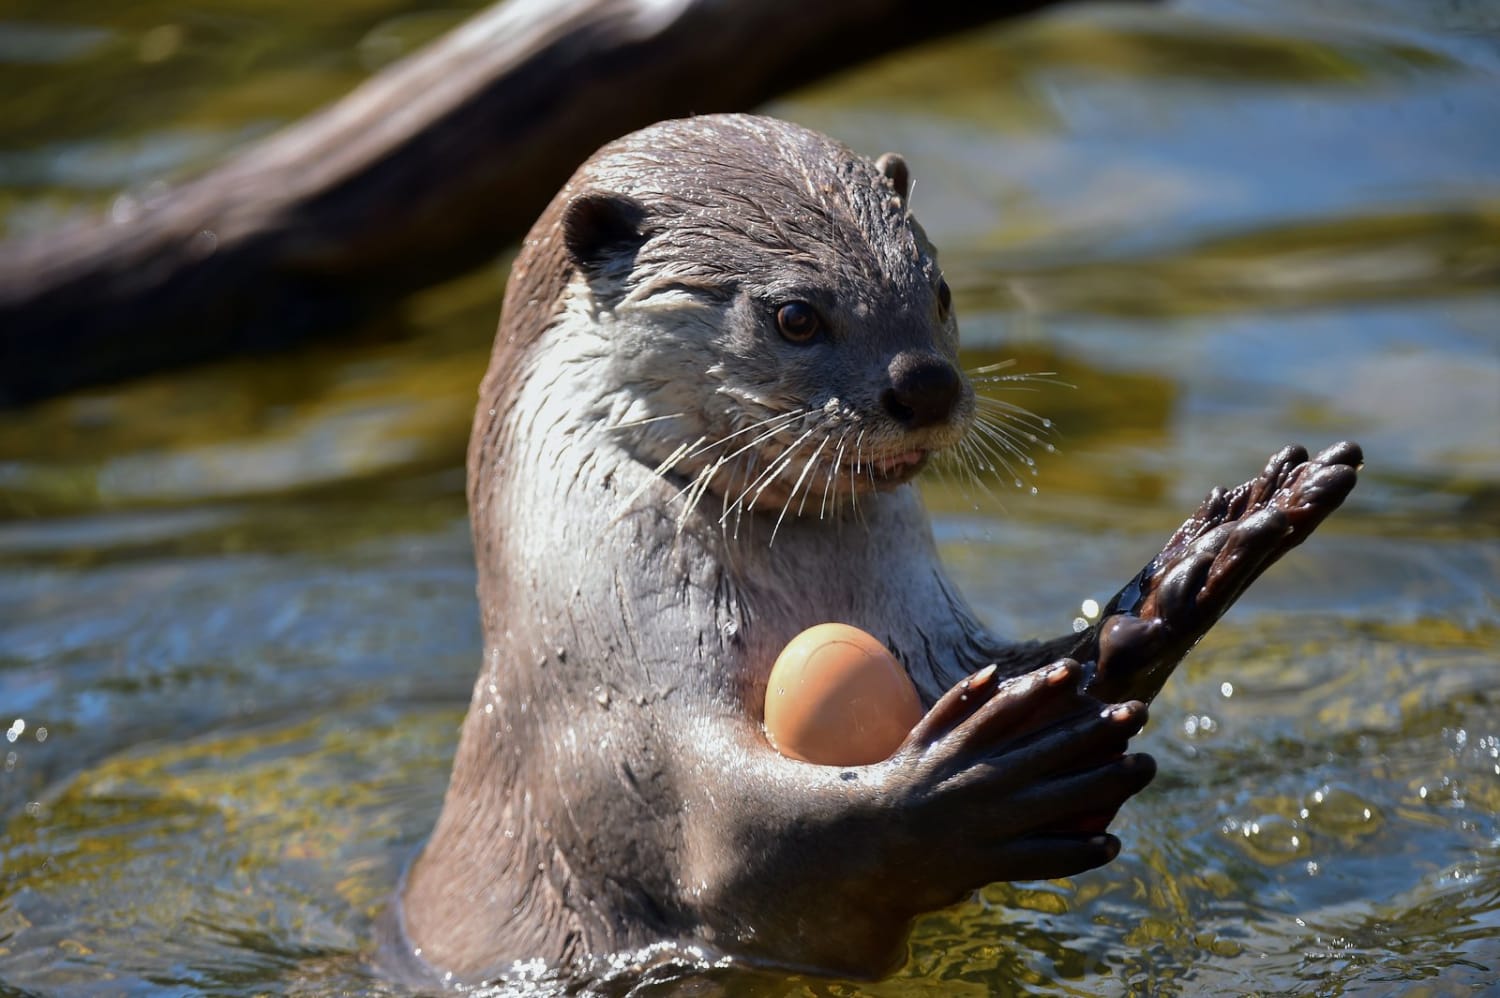 Otters 'Juggle,' but the Behavior's Function Remains Mysterious